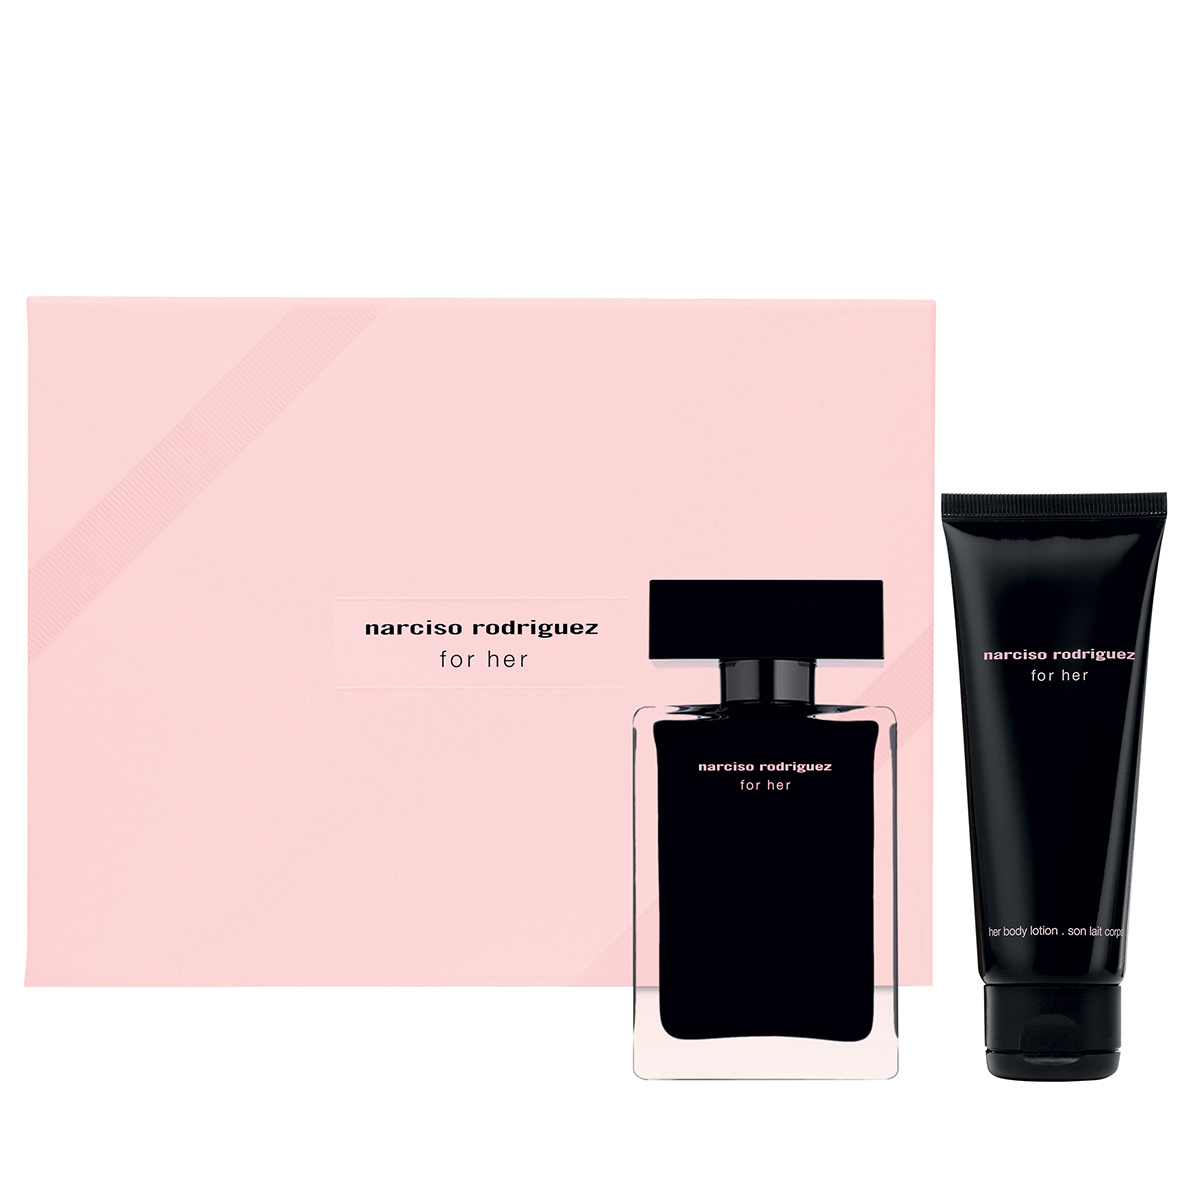 Narciso Rodriguez for her; eau de toilette & her body lotion